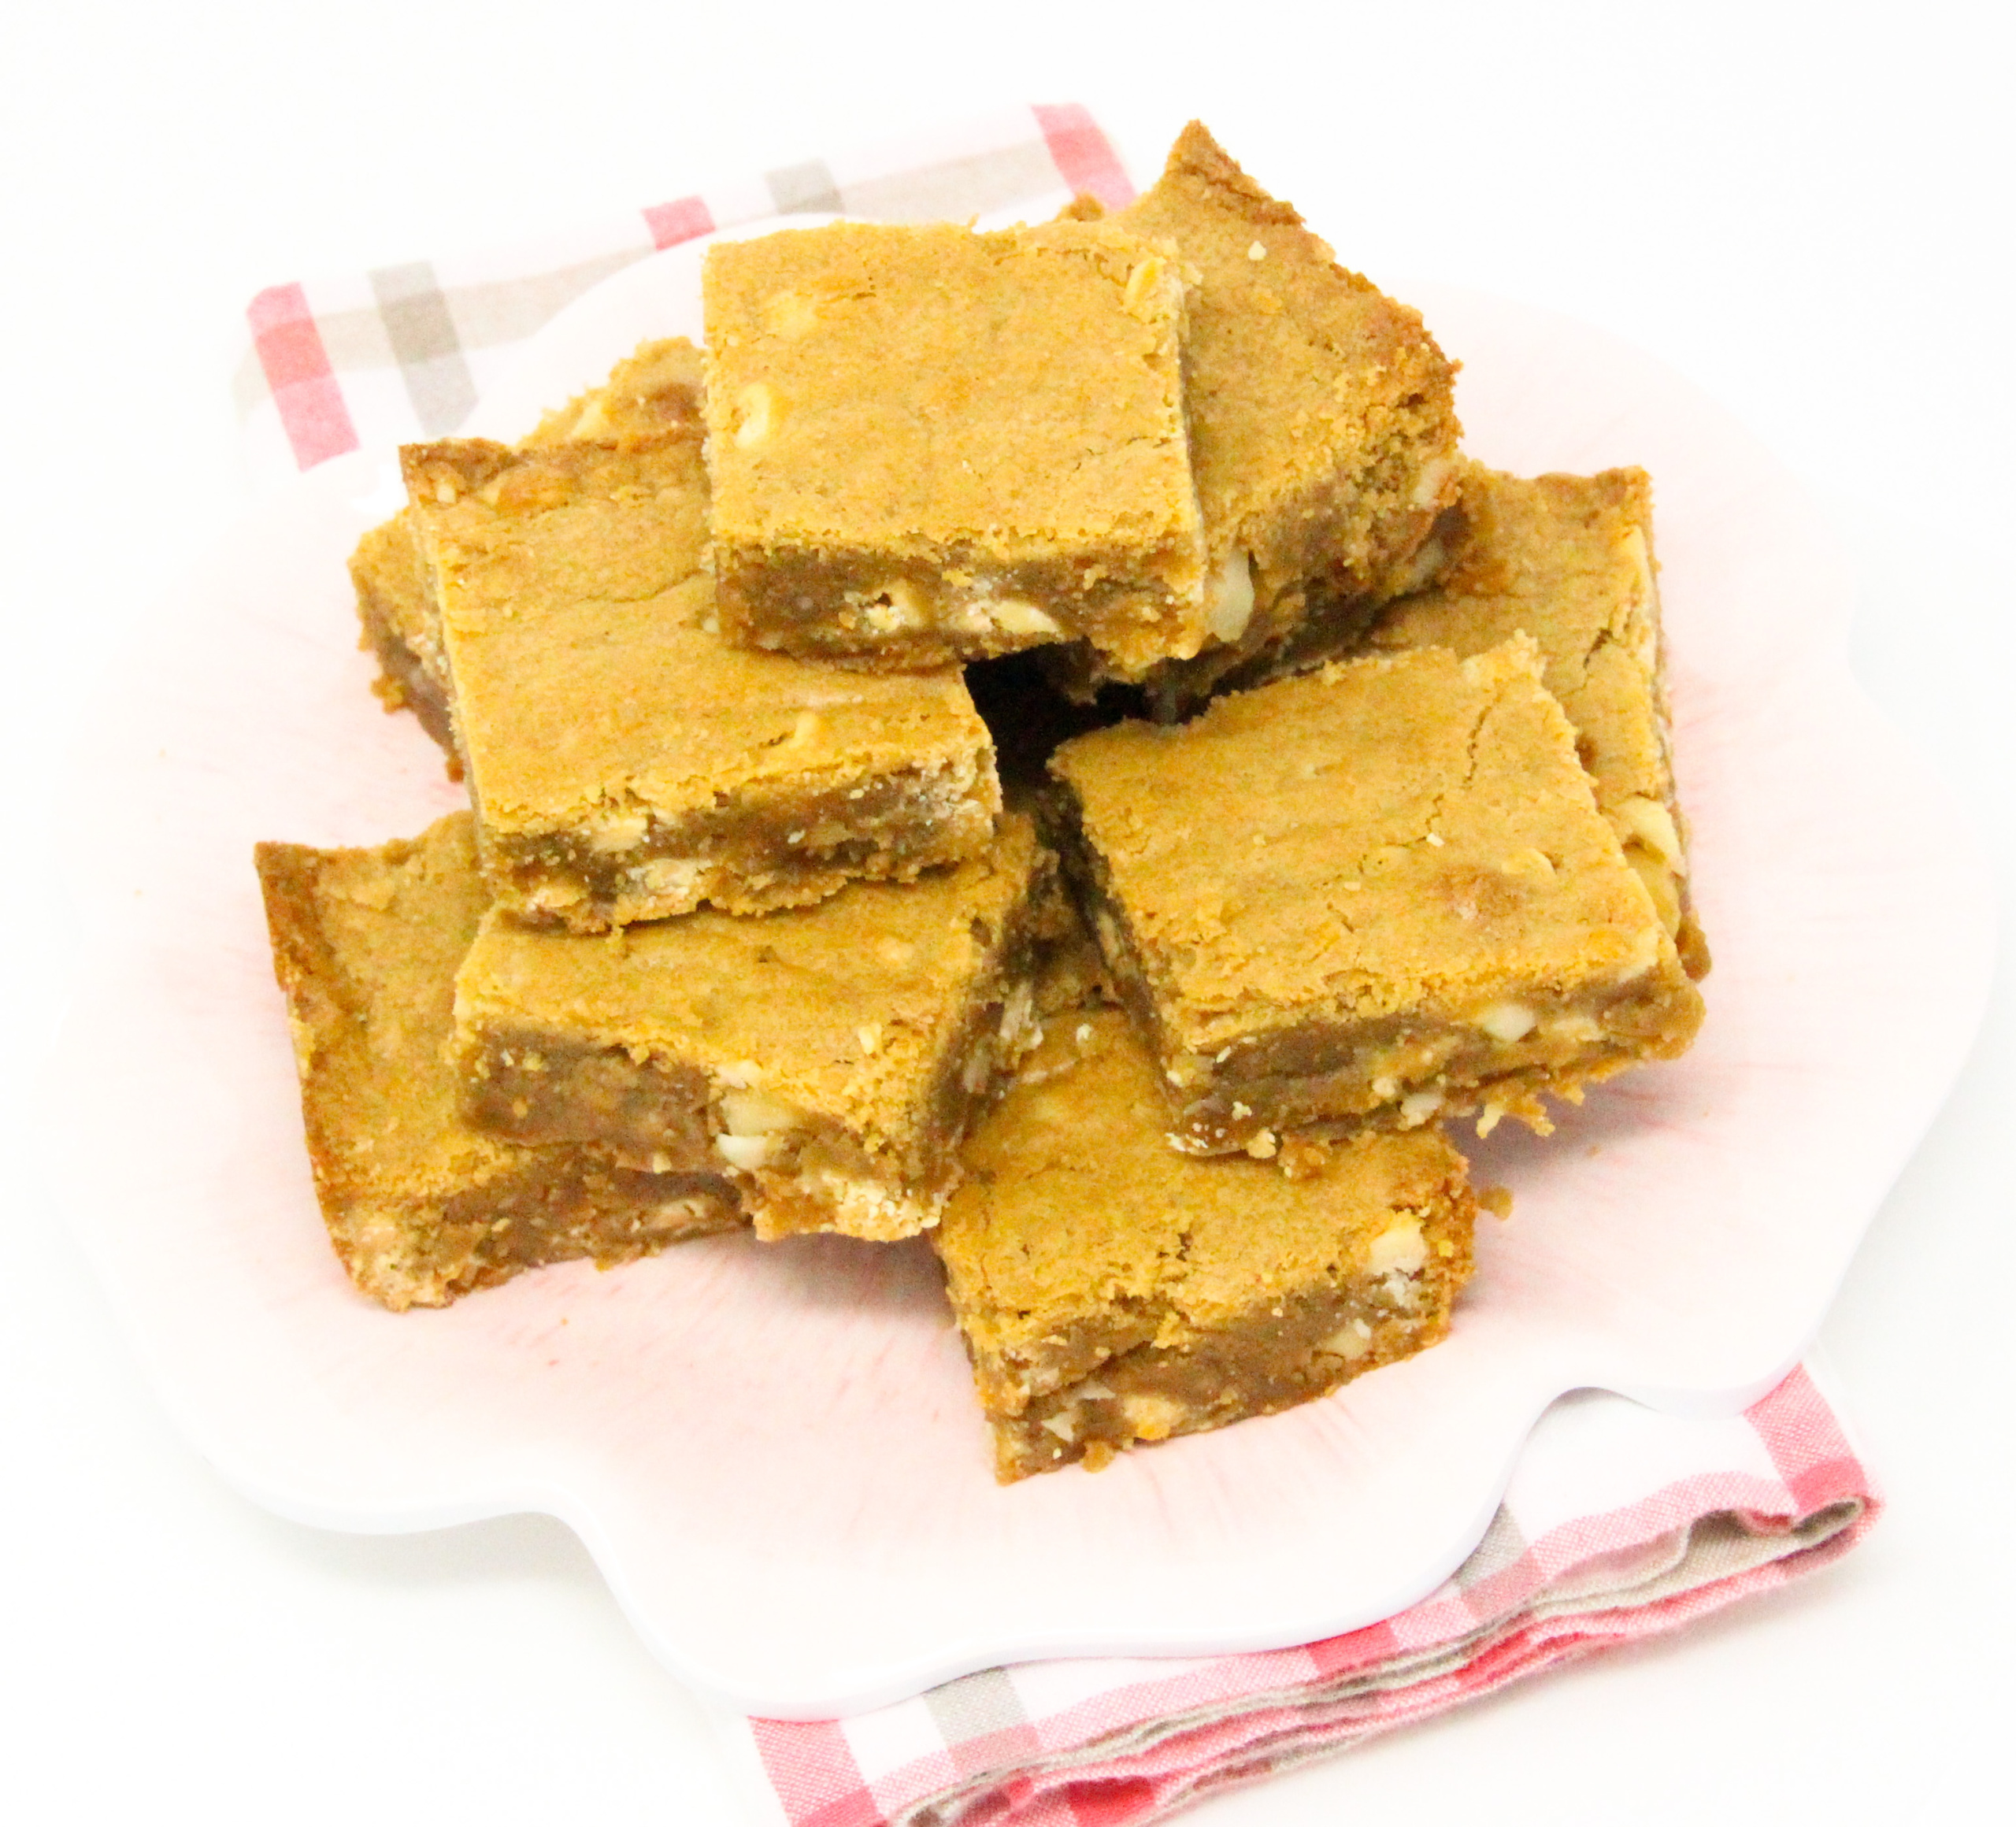 Sally’s Decadent Blondies are melt-in-your mouth deliciousness with a generous portion of macadamia nuts and white chocolate chips encased in a brown sugar-based cookie. Recipe shared with permission granted by Leslie Karst, author of THE FRAGRANCE OF DEATH.